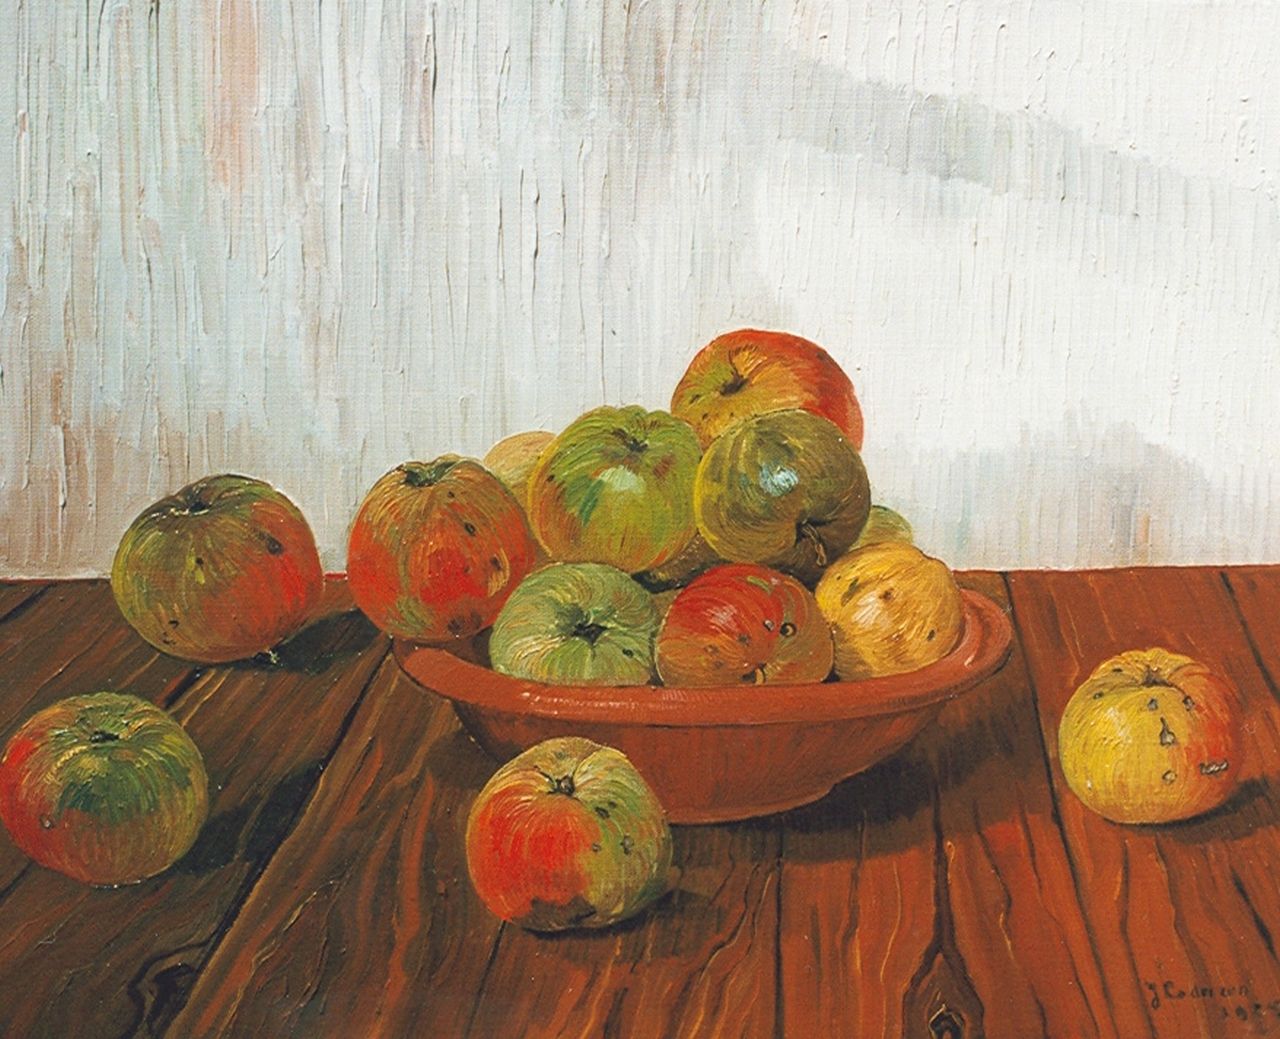 Lodeizen J.  | Johannes 'Jo' Lodeizen, Still life with apples on an oak table, oil on canvas 40.0 x 50.3 cm, signed l.r. and dated 1925